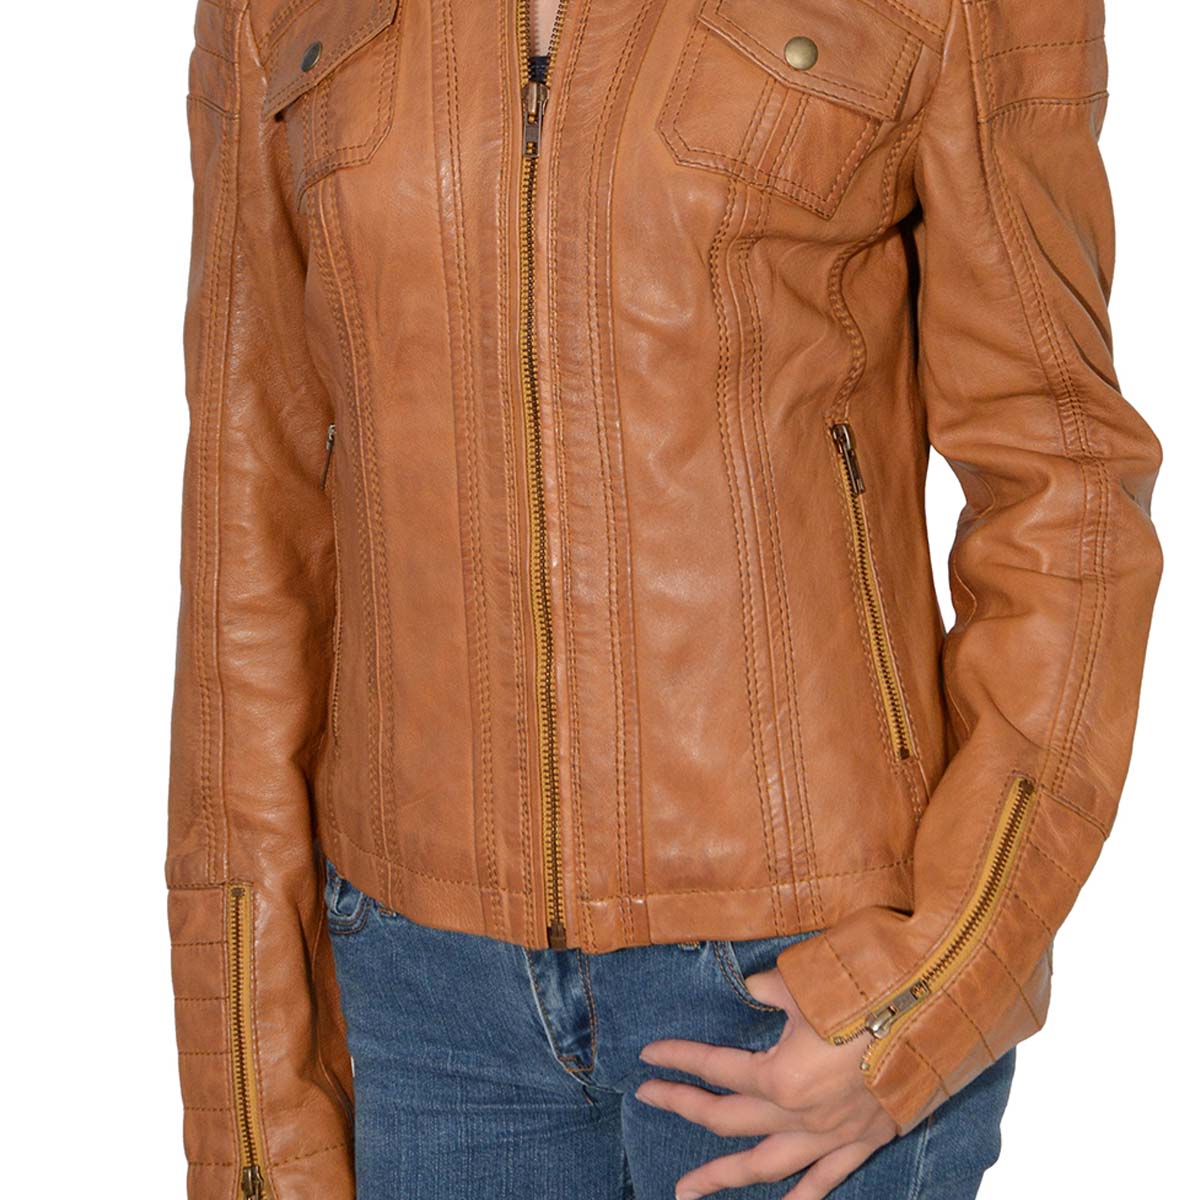 Milwaukee Leather SFL2805 Women's Cognac 'Quilted' Mandarin Collar Fashion Casual Leather Jacket 4X-Large - image 2 of 2